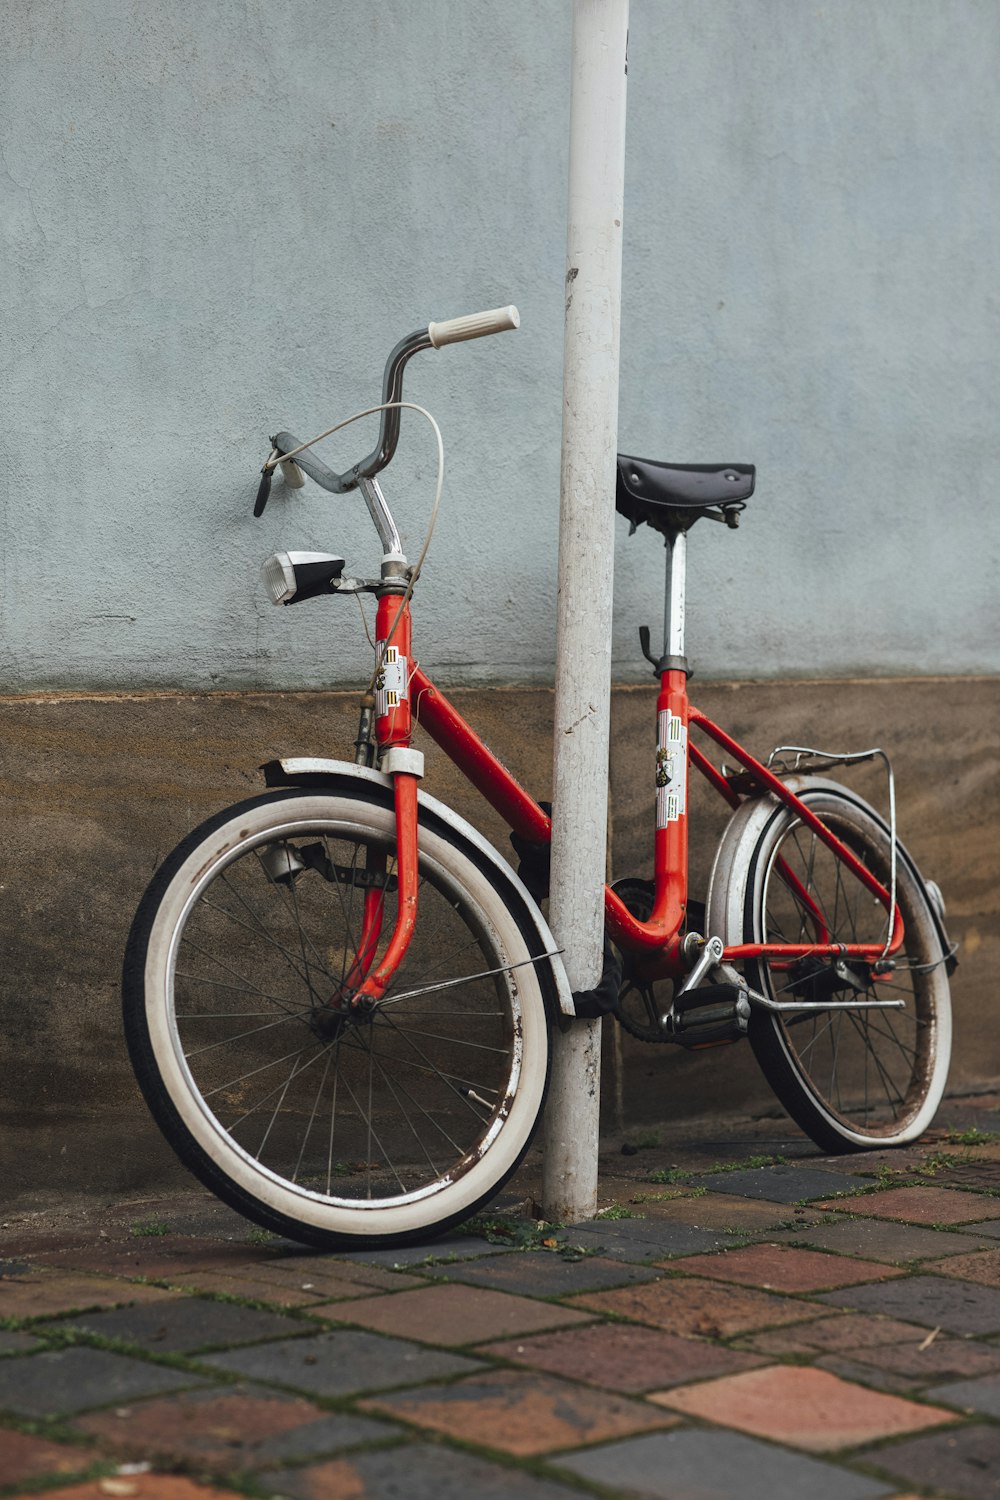 a red bicycle is leaning against a pole